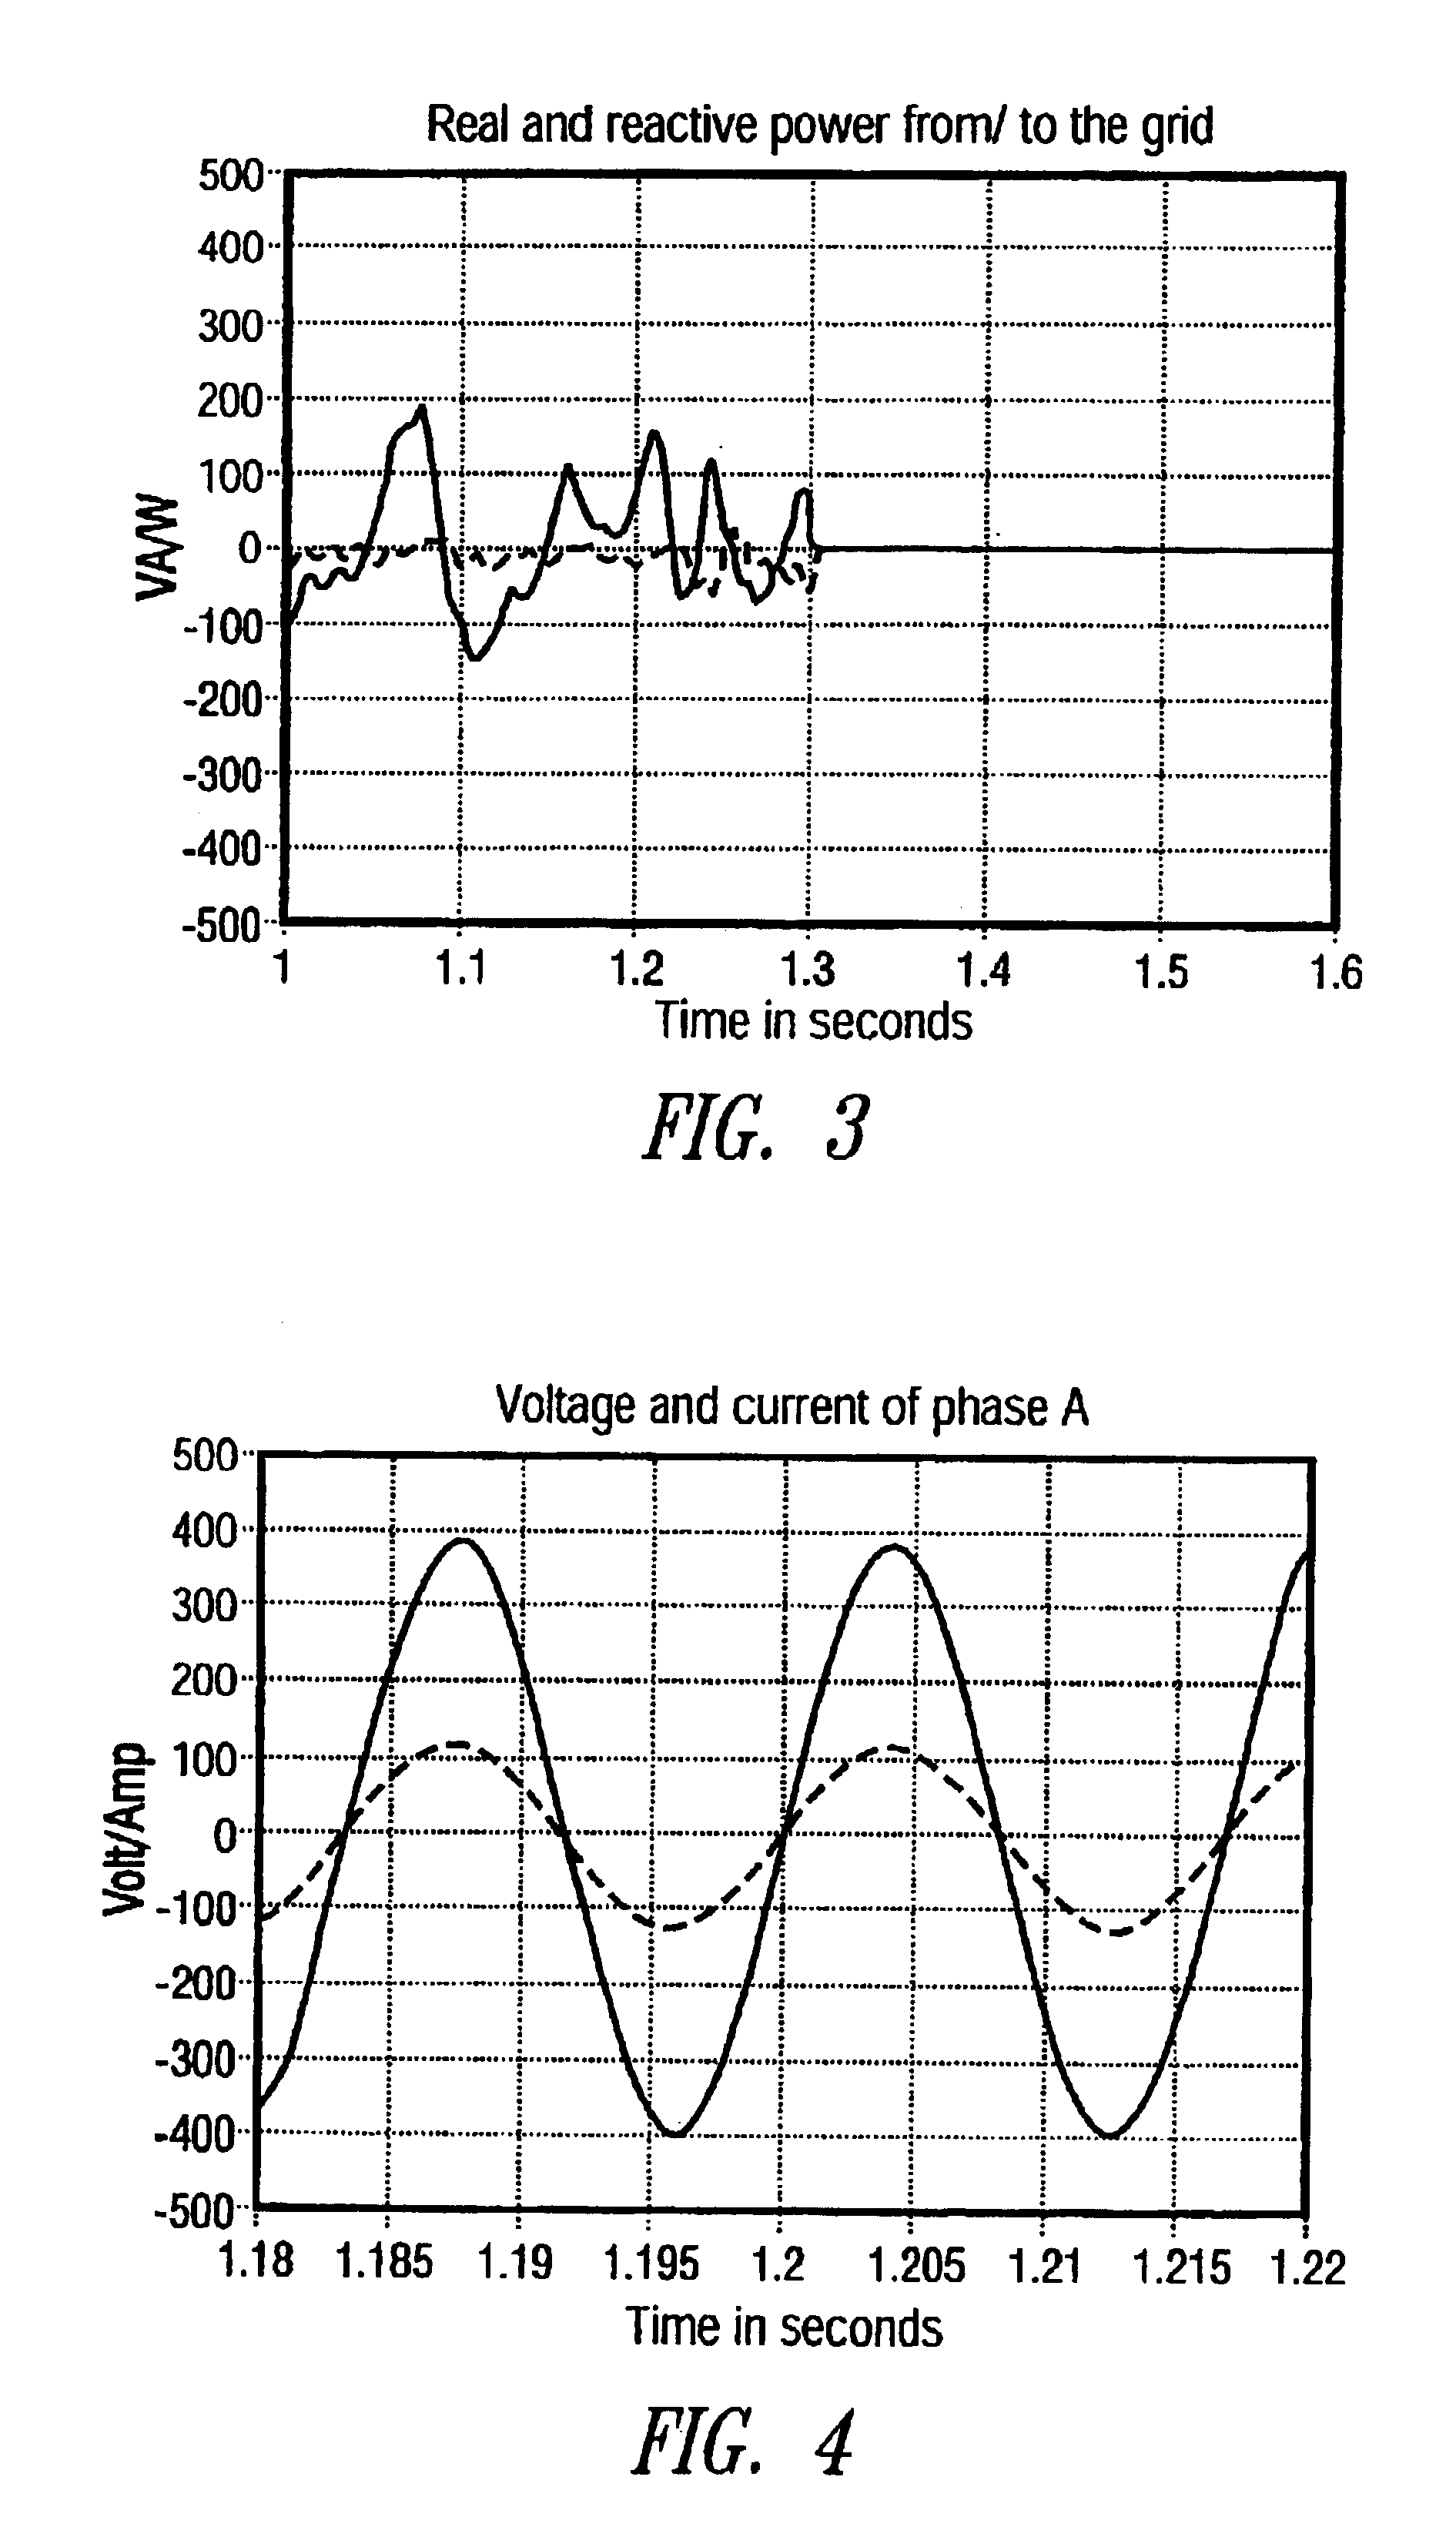 Anti-islanding device and method for grid connected inverters using random noise injection